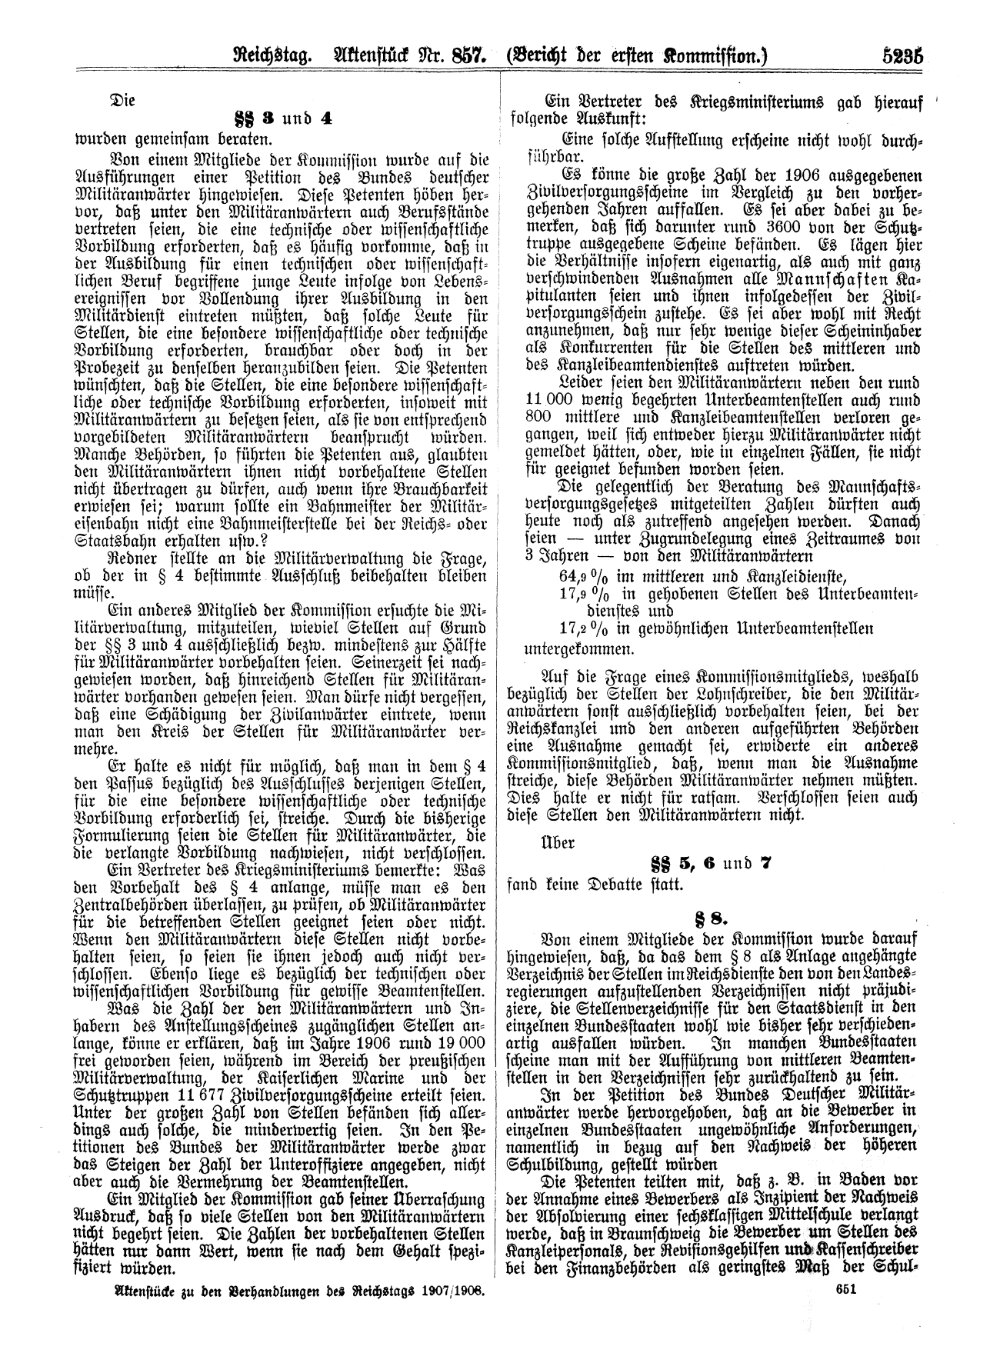 Scan of page 5235